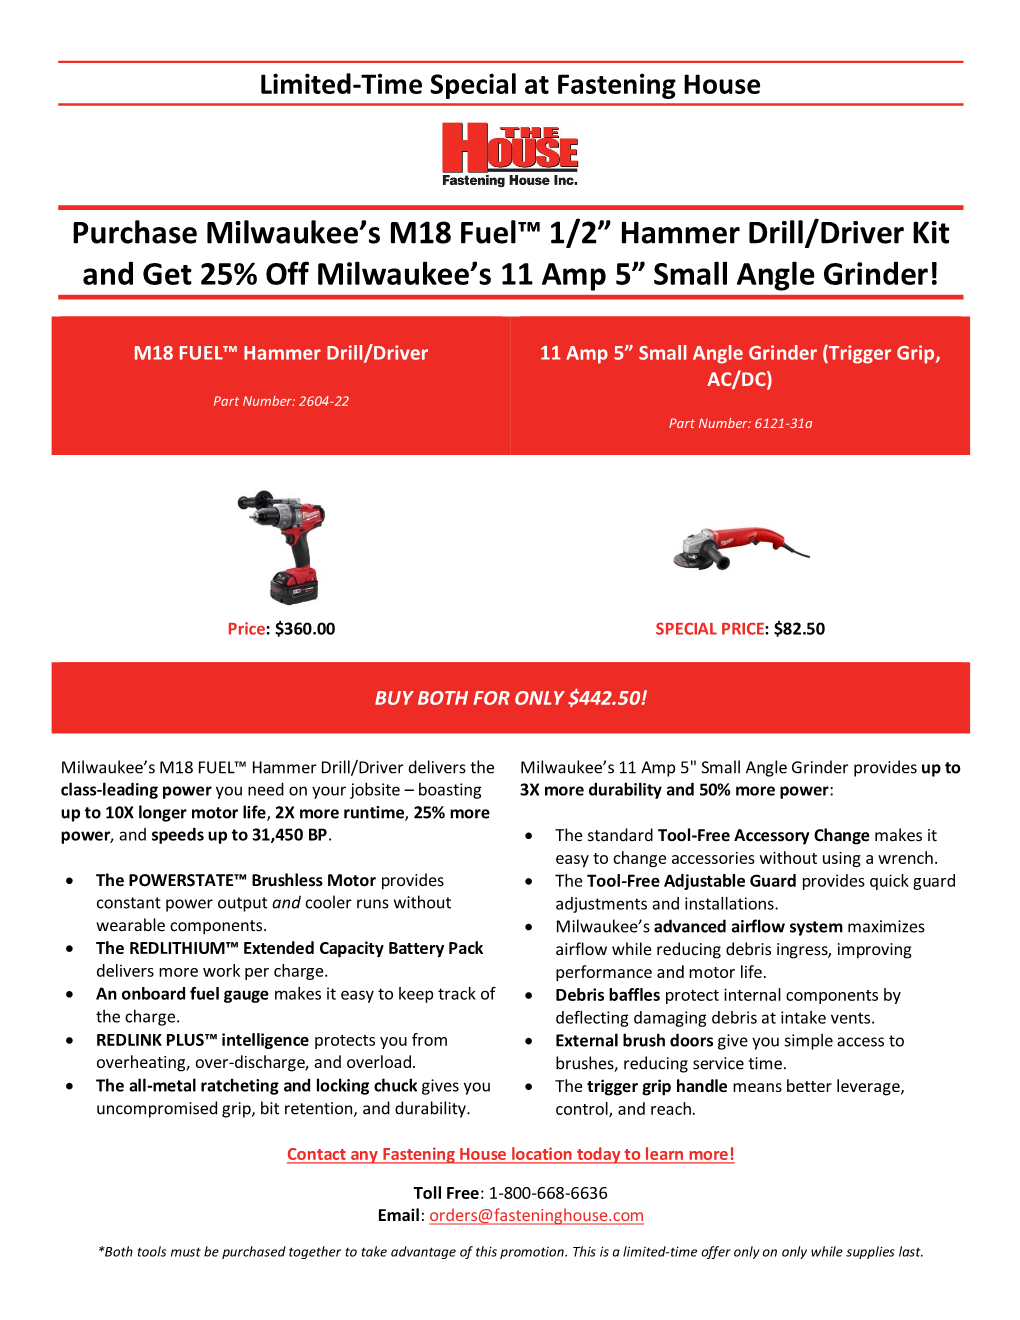 Purchase Milwaukee's M18 Fuel™ 1/2” Hammer Drill/Driver Kit and Get 25% Off Milwaukee's 11 Amp 5” Small Angle Grinder!